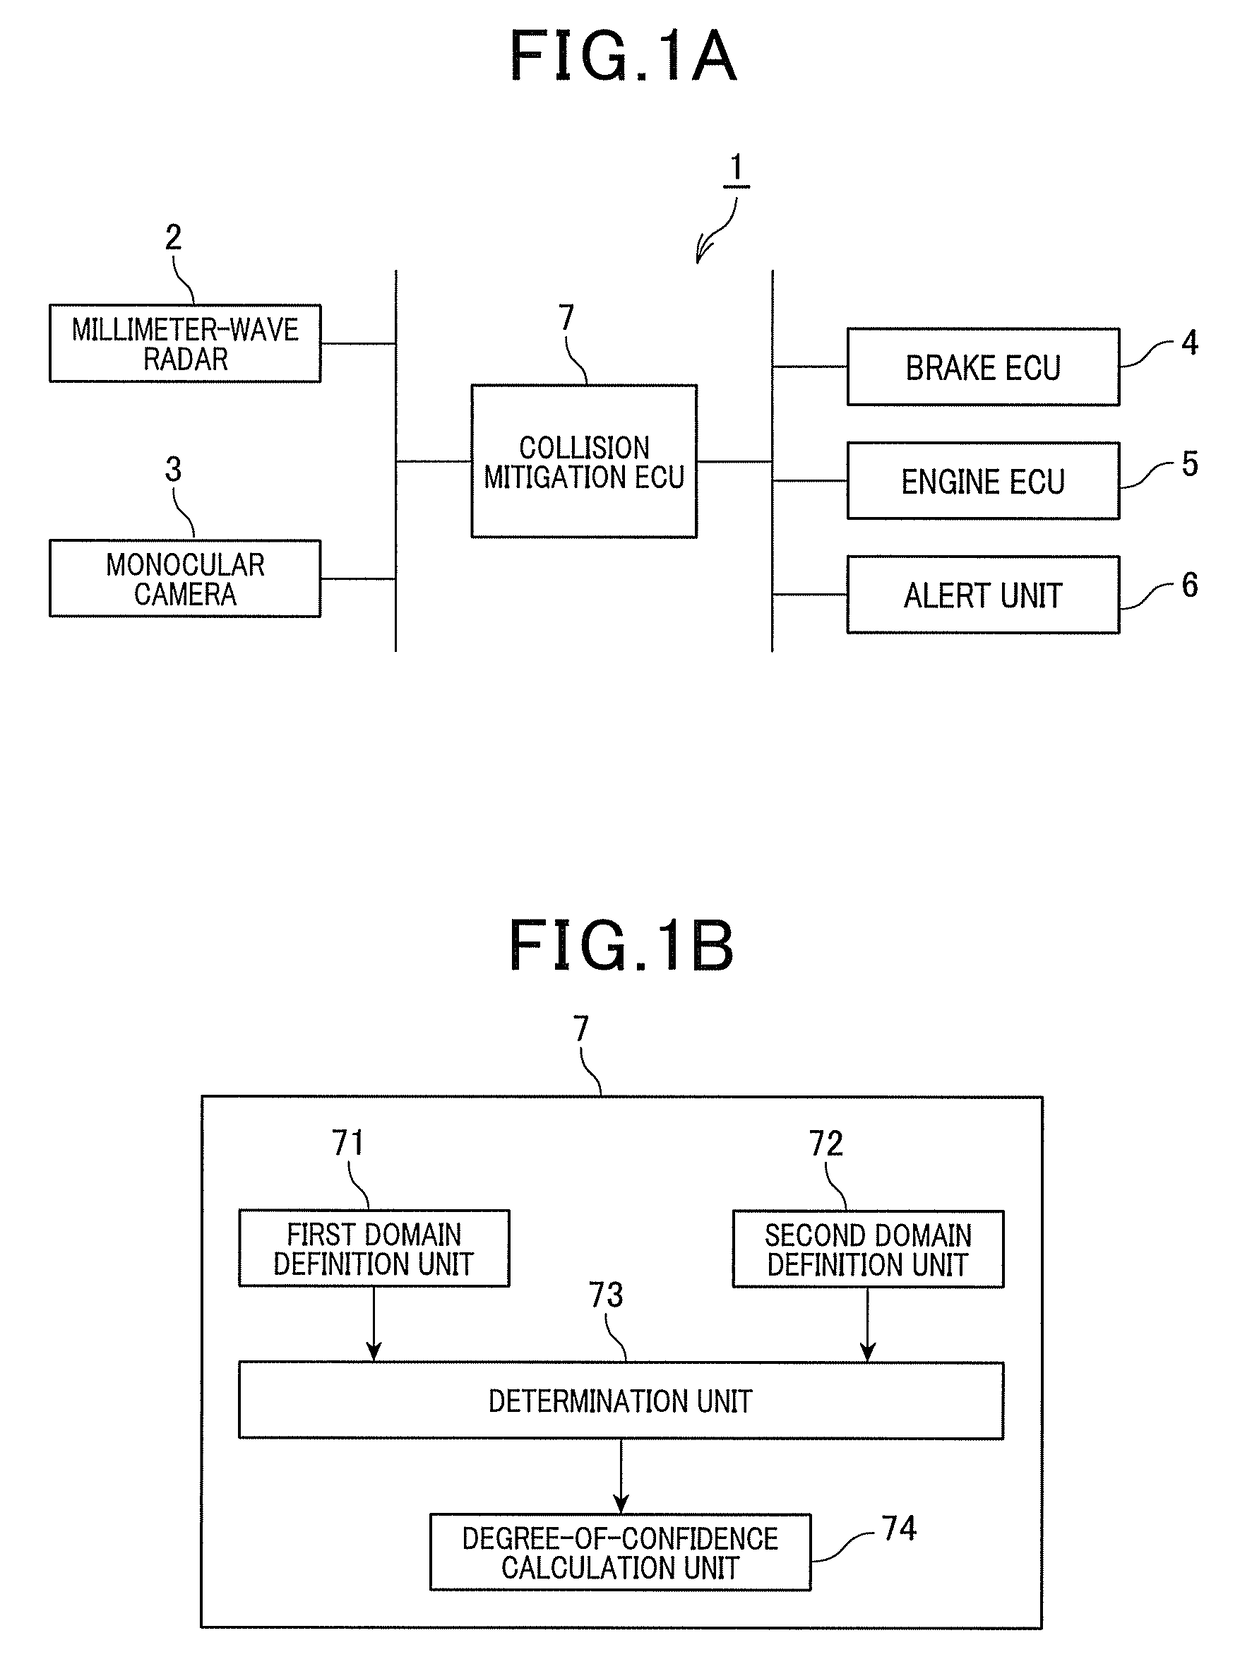 Object detection apparatus